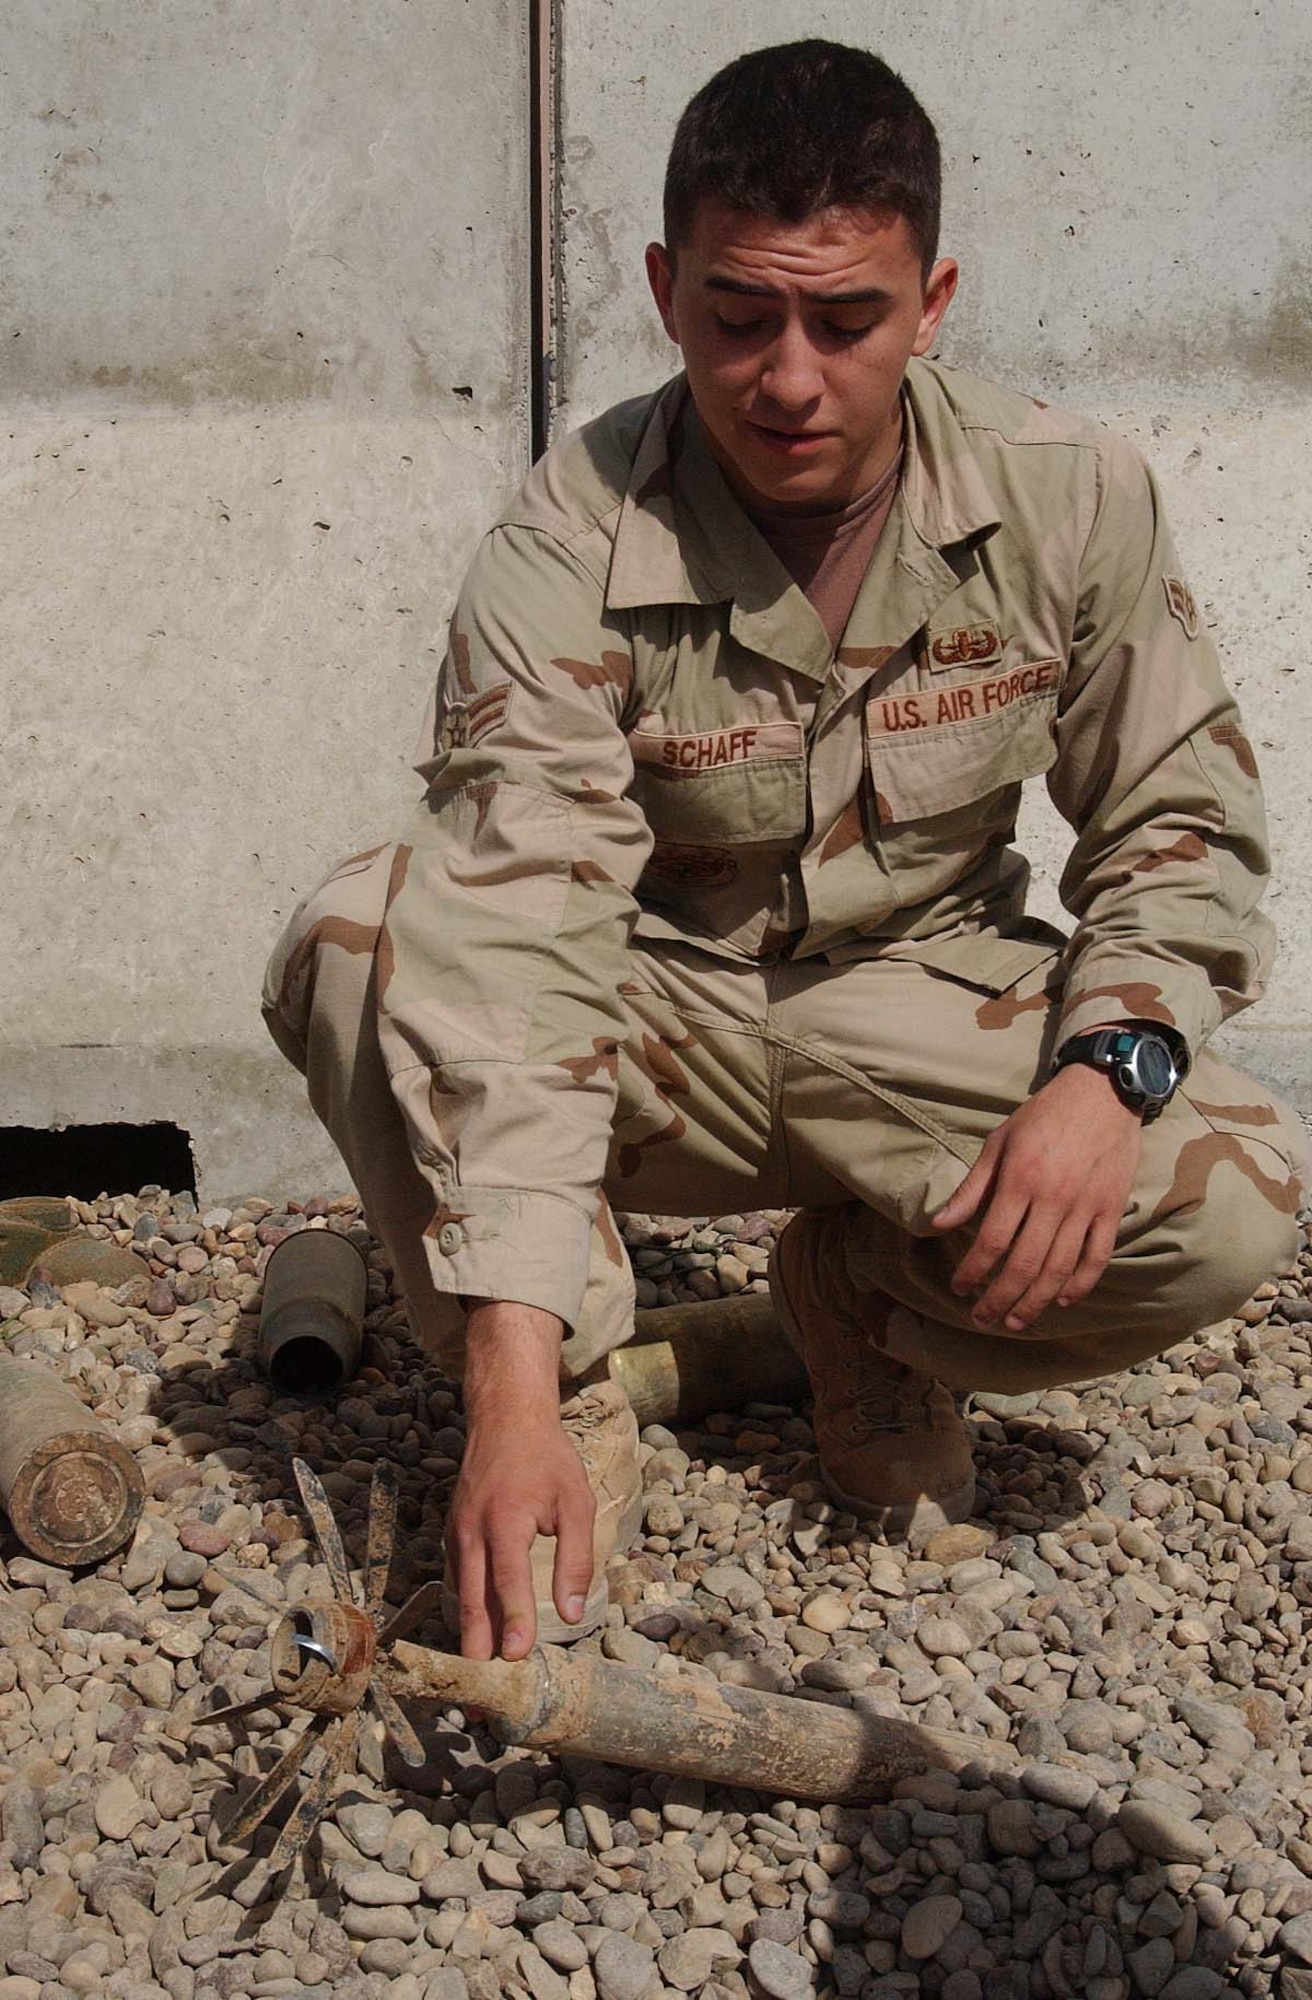 BALAD AIR BASE, Iraq -- Airman 1st Class Isaiah Schaff shows what common unexploded ordnance looks like.  He is a 332nd Expeditionary Civil Engineer Squadron explosive ordnance disposal technician here.  (U.S. Air Force photo by Senior Airman Colleen Wronek)